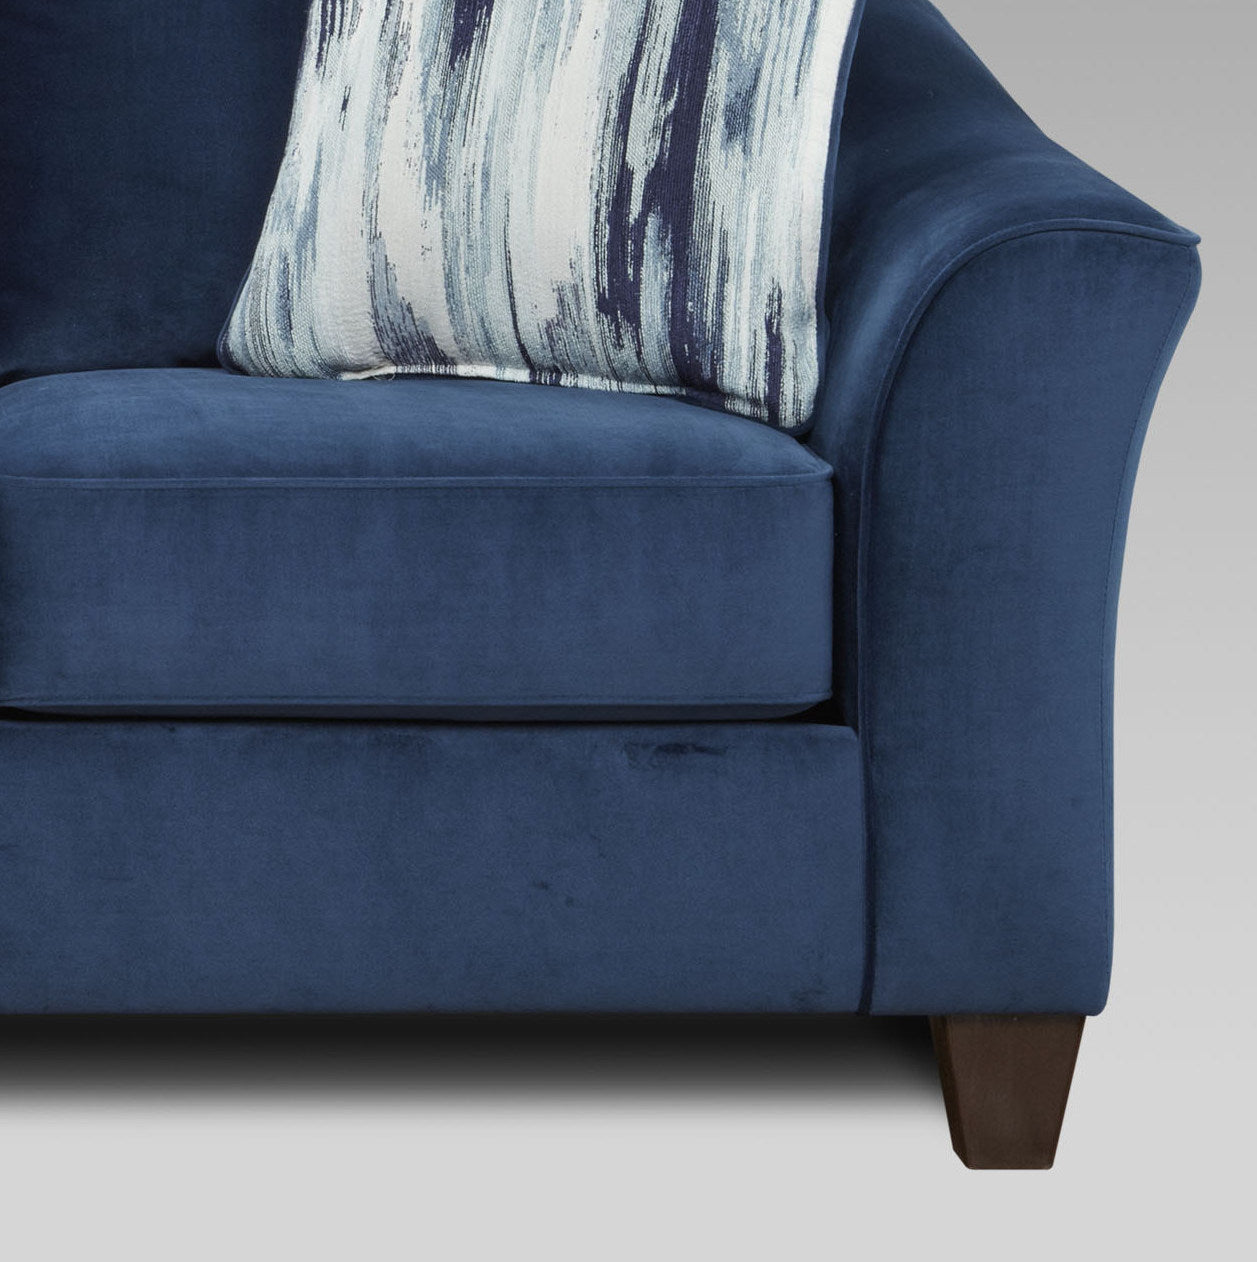 Camero Fabric Pillowback Chair with Ottoman Set in Navy Blue